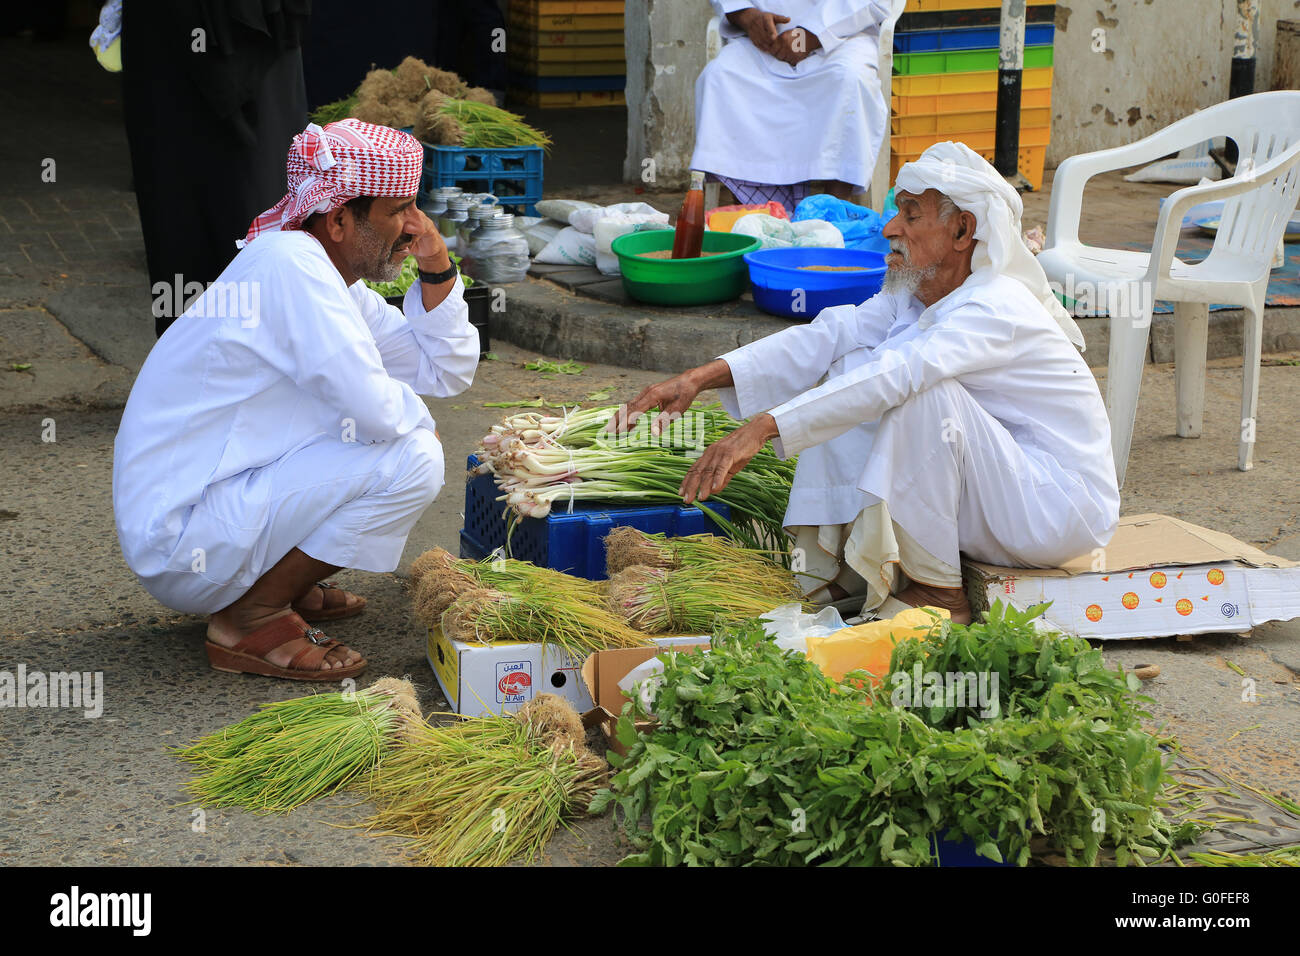 Two Arabs on the market in Al Ain in the United Arab Emirates Stock Photo